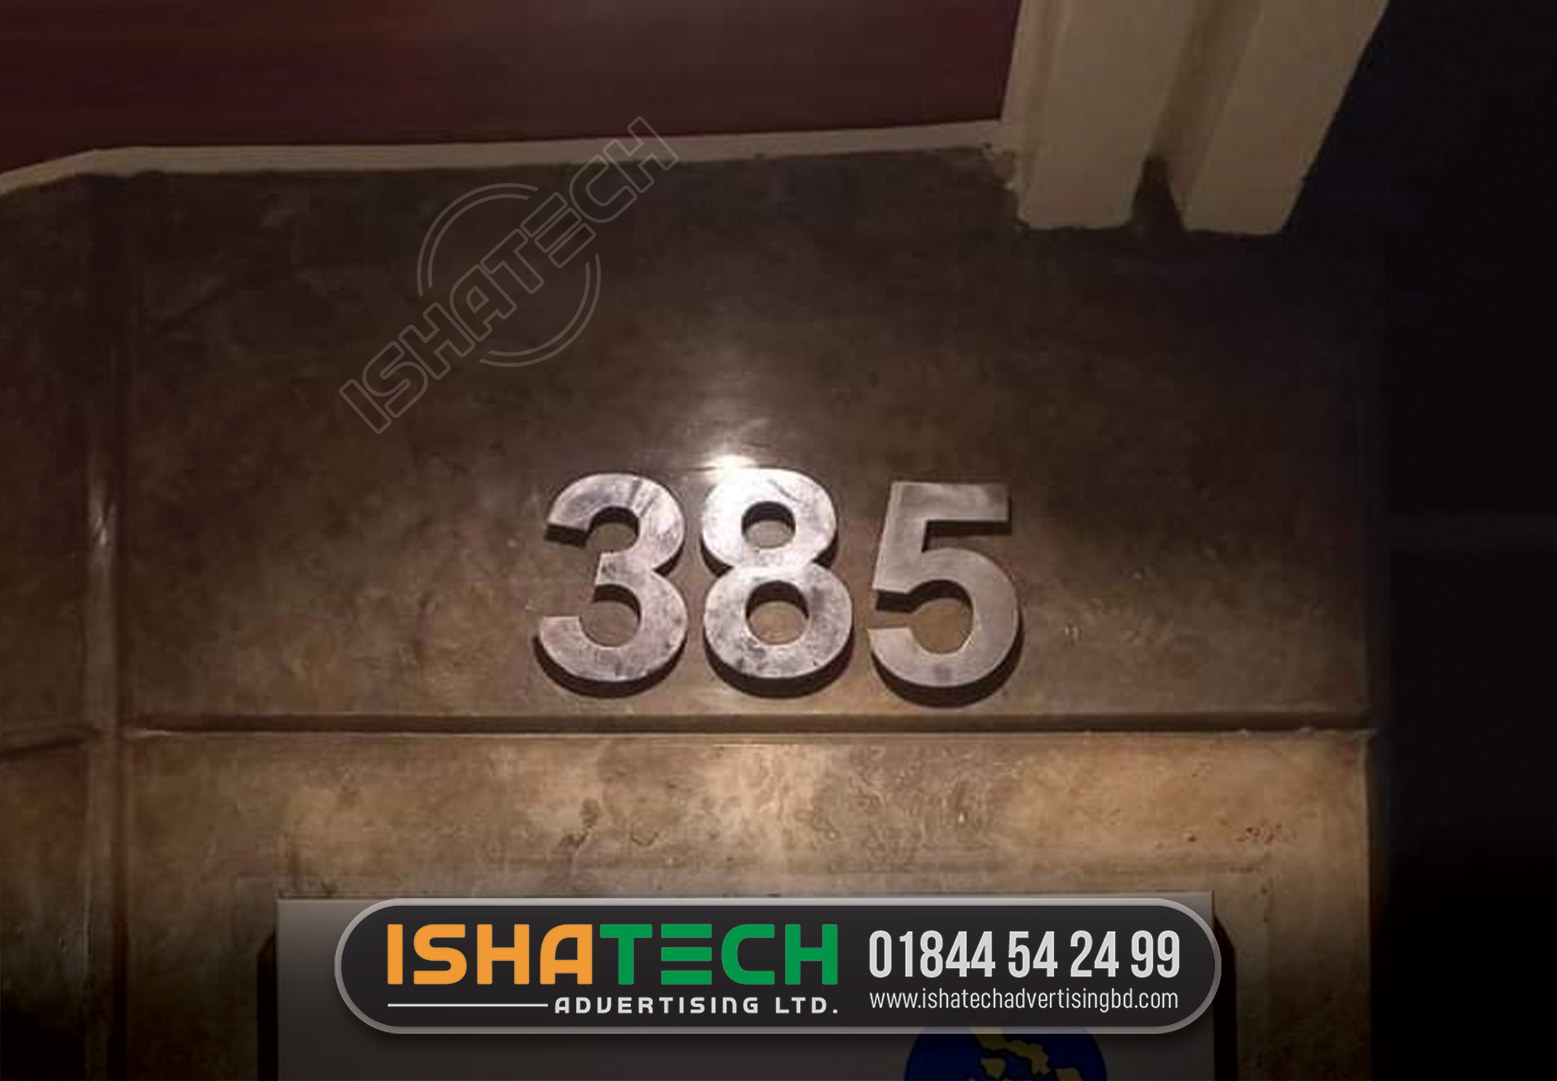 HOUSE NUMBERPLATE 385, HOUSE NUMBER 385, SS HOUSE NUMBER PLATE MAKING BY ISHATECH ADVERTISING LTD.